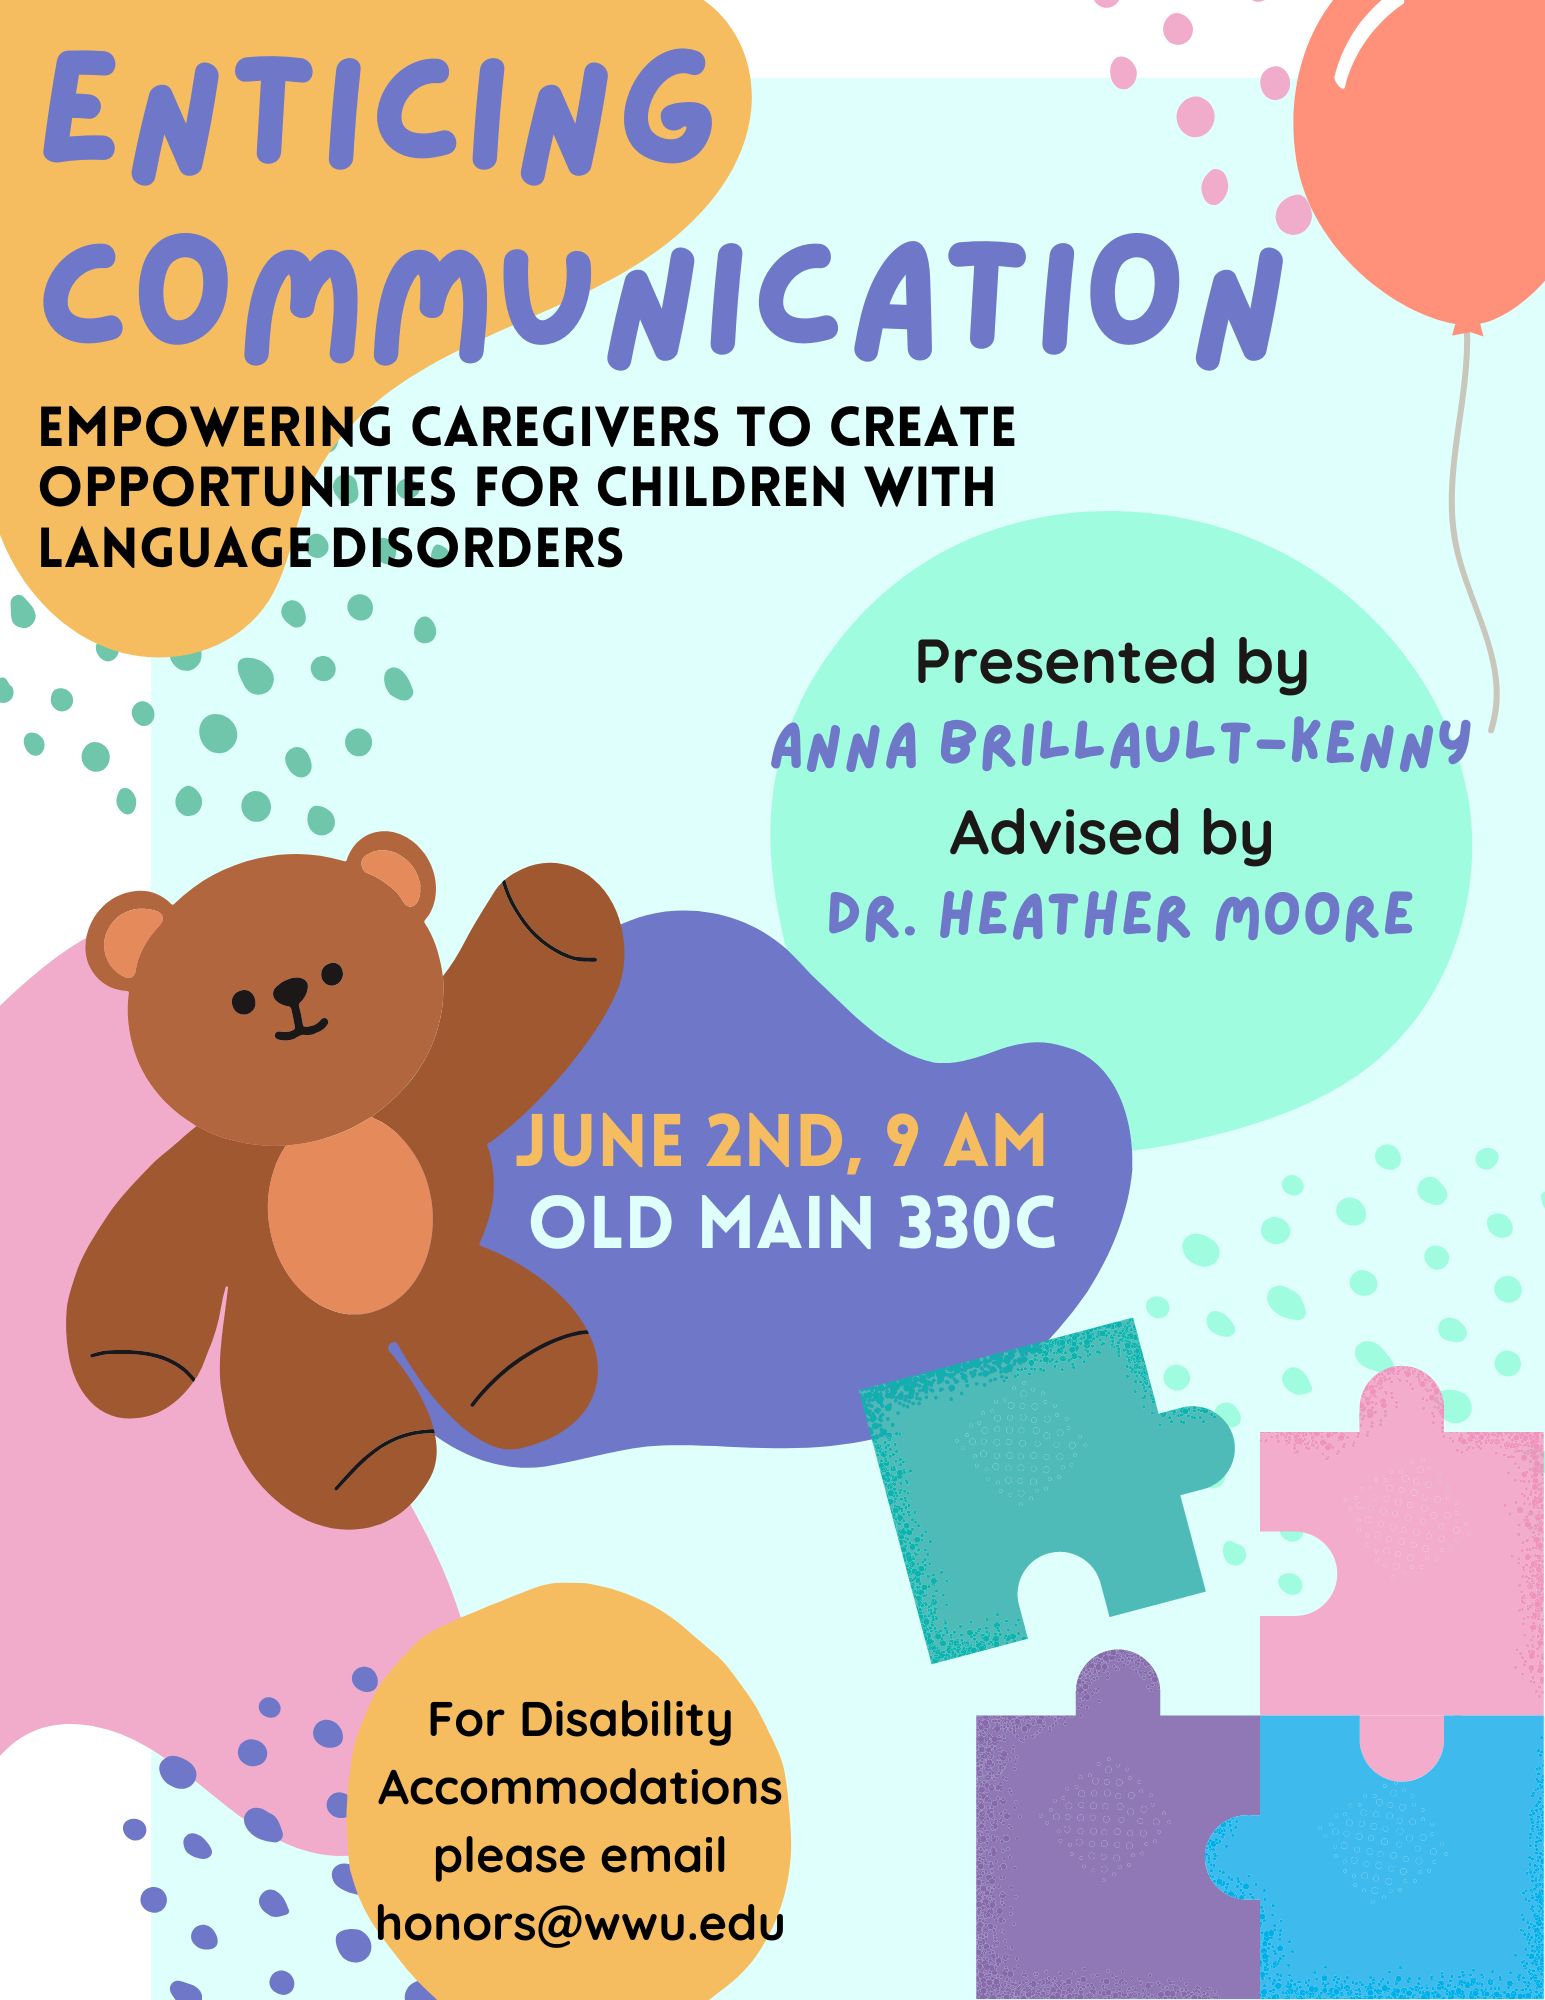 A light blue background that has several yellow, pink, purple, and blue blobs. In the far left corner reads “Enticing Communication. Empowering Caregivers to Create Opportunities for Children with Language Disorder. Presented by Anna Brillault-Kenny Advised by Dr. Heather Moore. June 2nd, 9 AM, Old Main 330C. For Disability Accommodations please email honors@wwu.edu".  